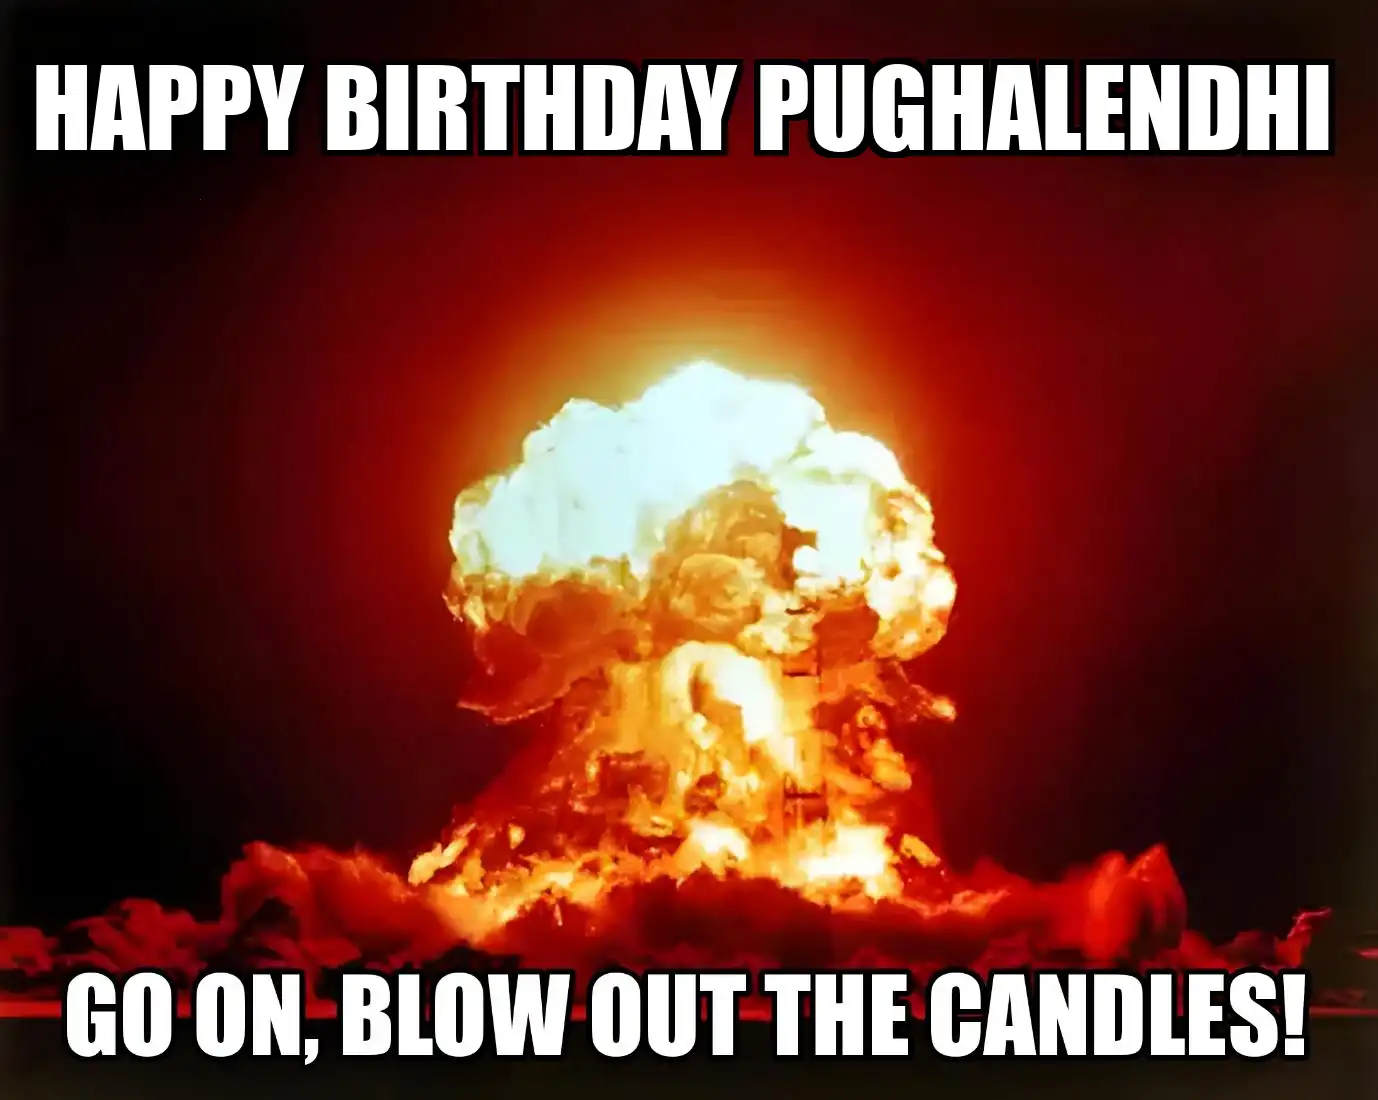 Happy Birthday Pughalendhi Go On Blow Out The Candles Meme